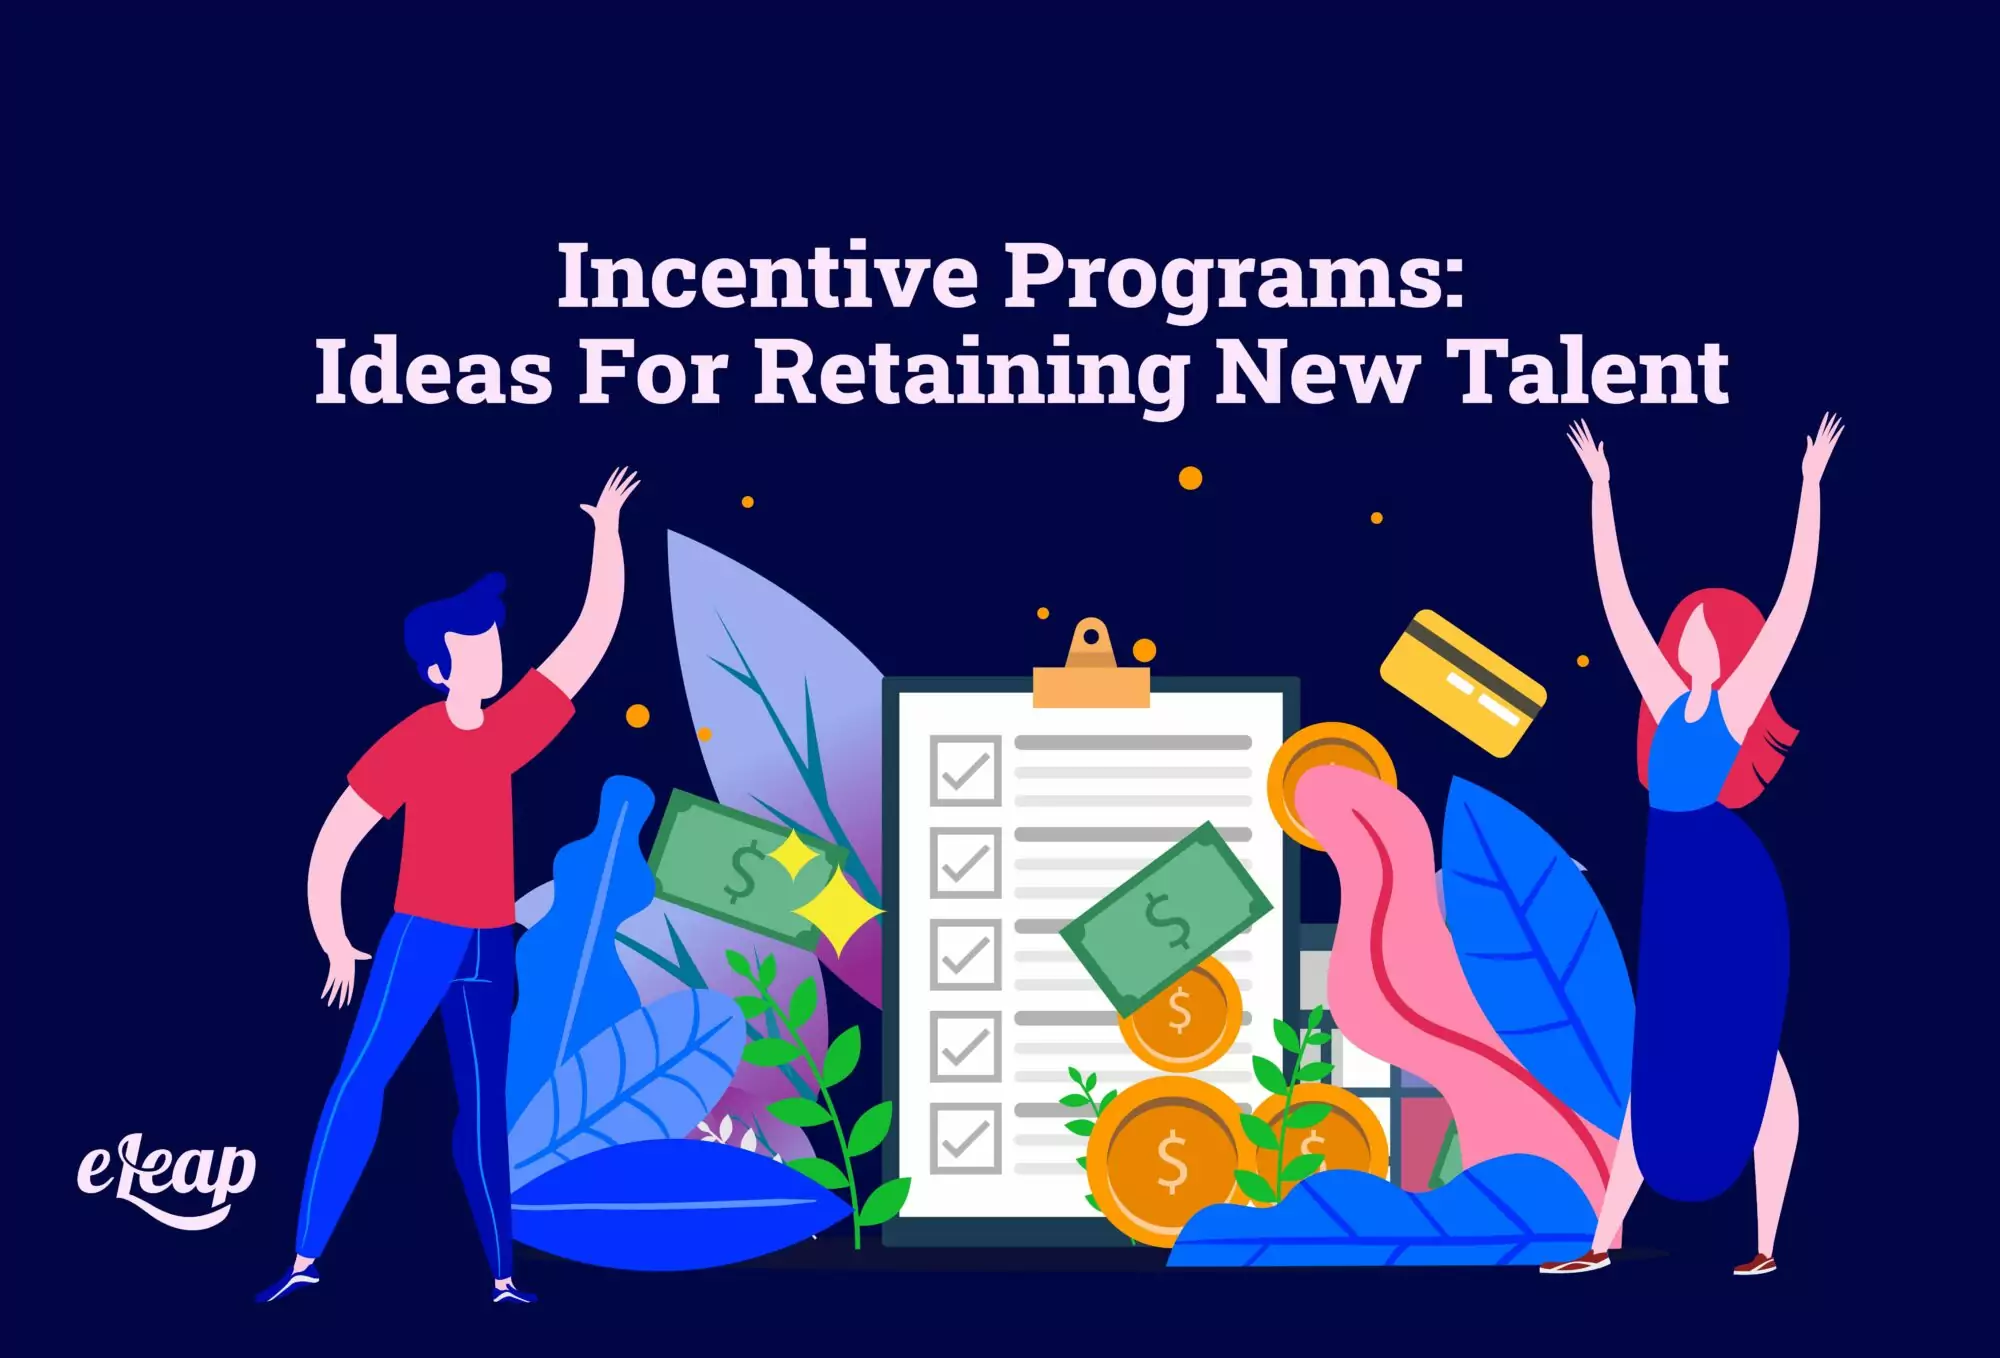 Incentive Programs: Ideas For Retaining New Talent